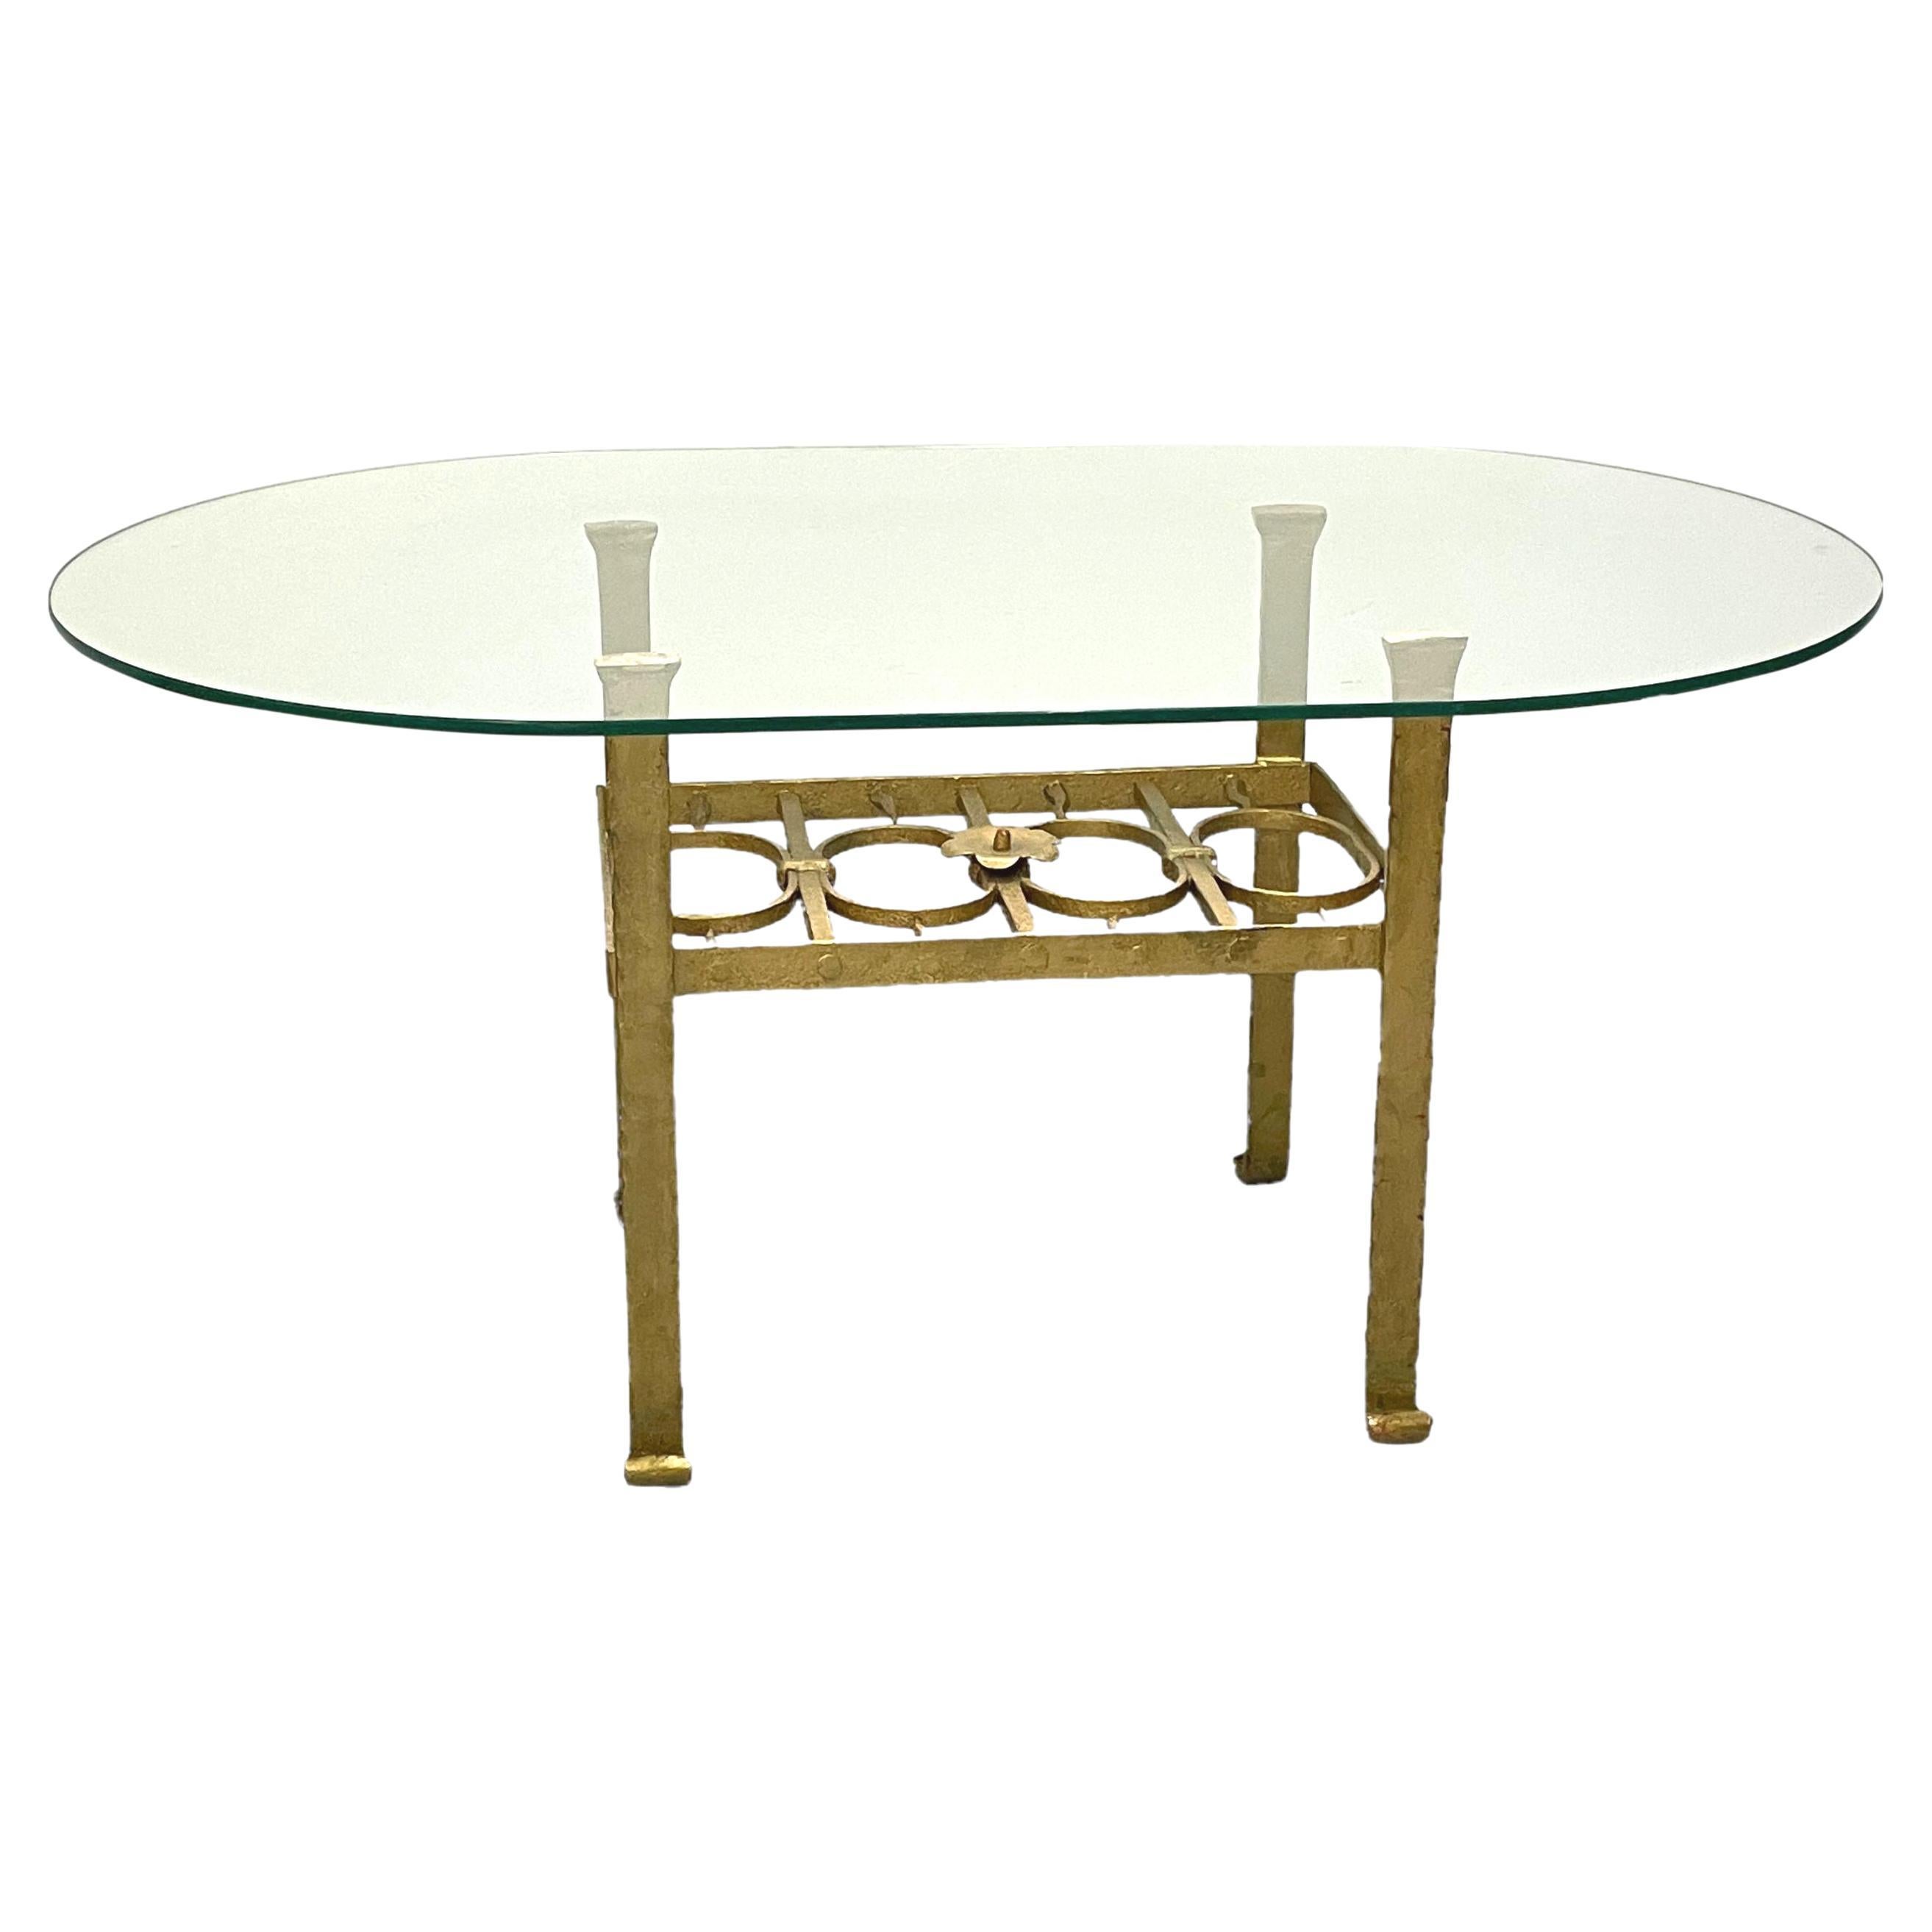 Brutalist Gilt Iron Coffee Table, Tole Toleware Style, German, 1960s For Sale